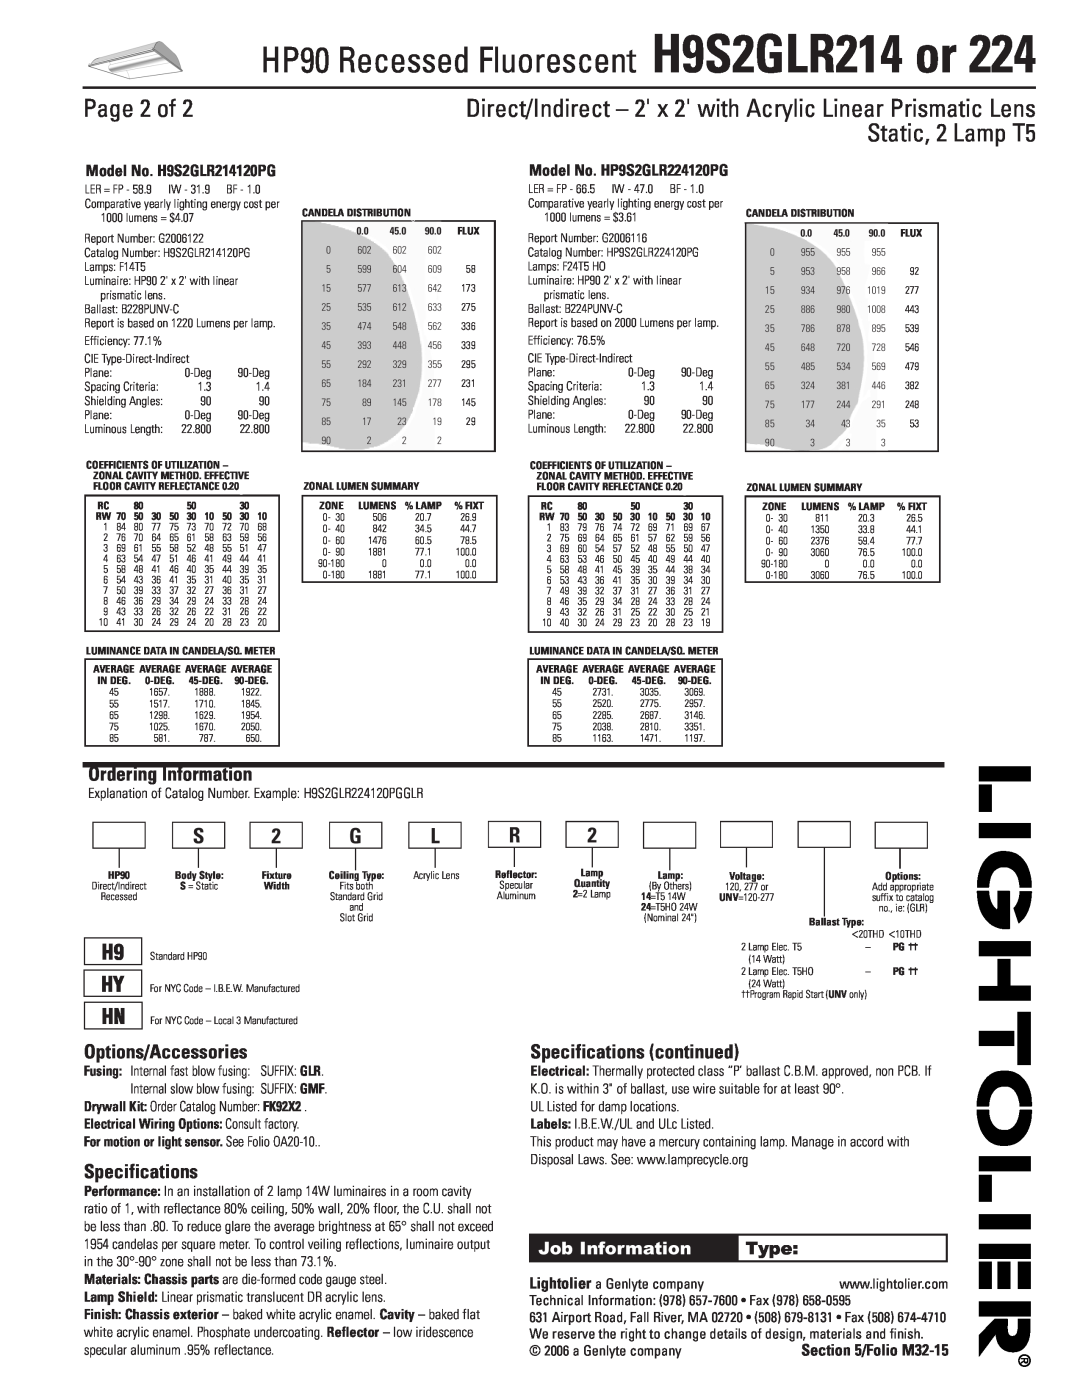 Lightolier H9S2GLR214 Page 2 of, Ordering Information, Options/Accessories, Specifications continued, Job Information 